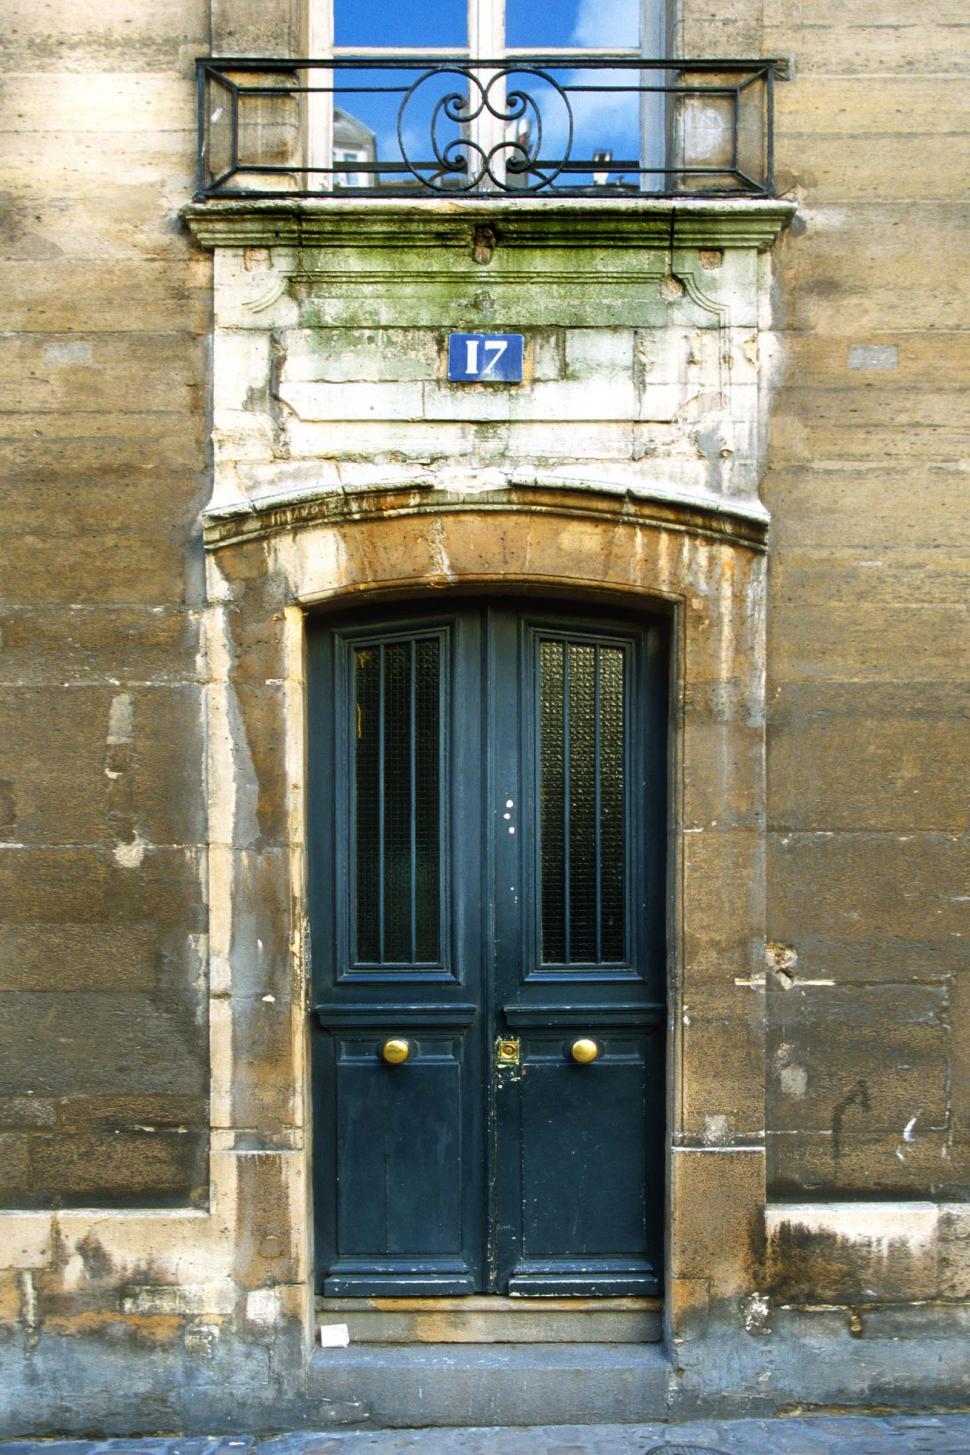 Free Image of Old Building With Blue Door and Window 